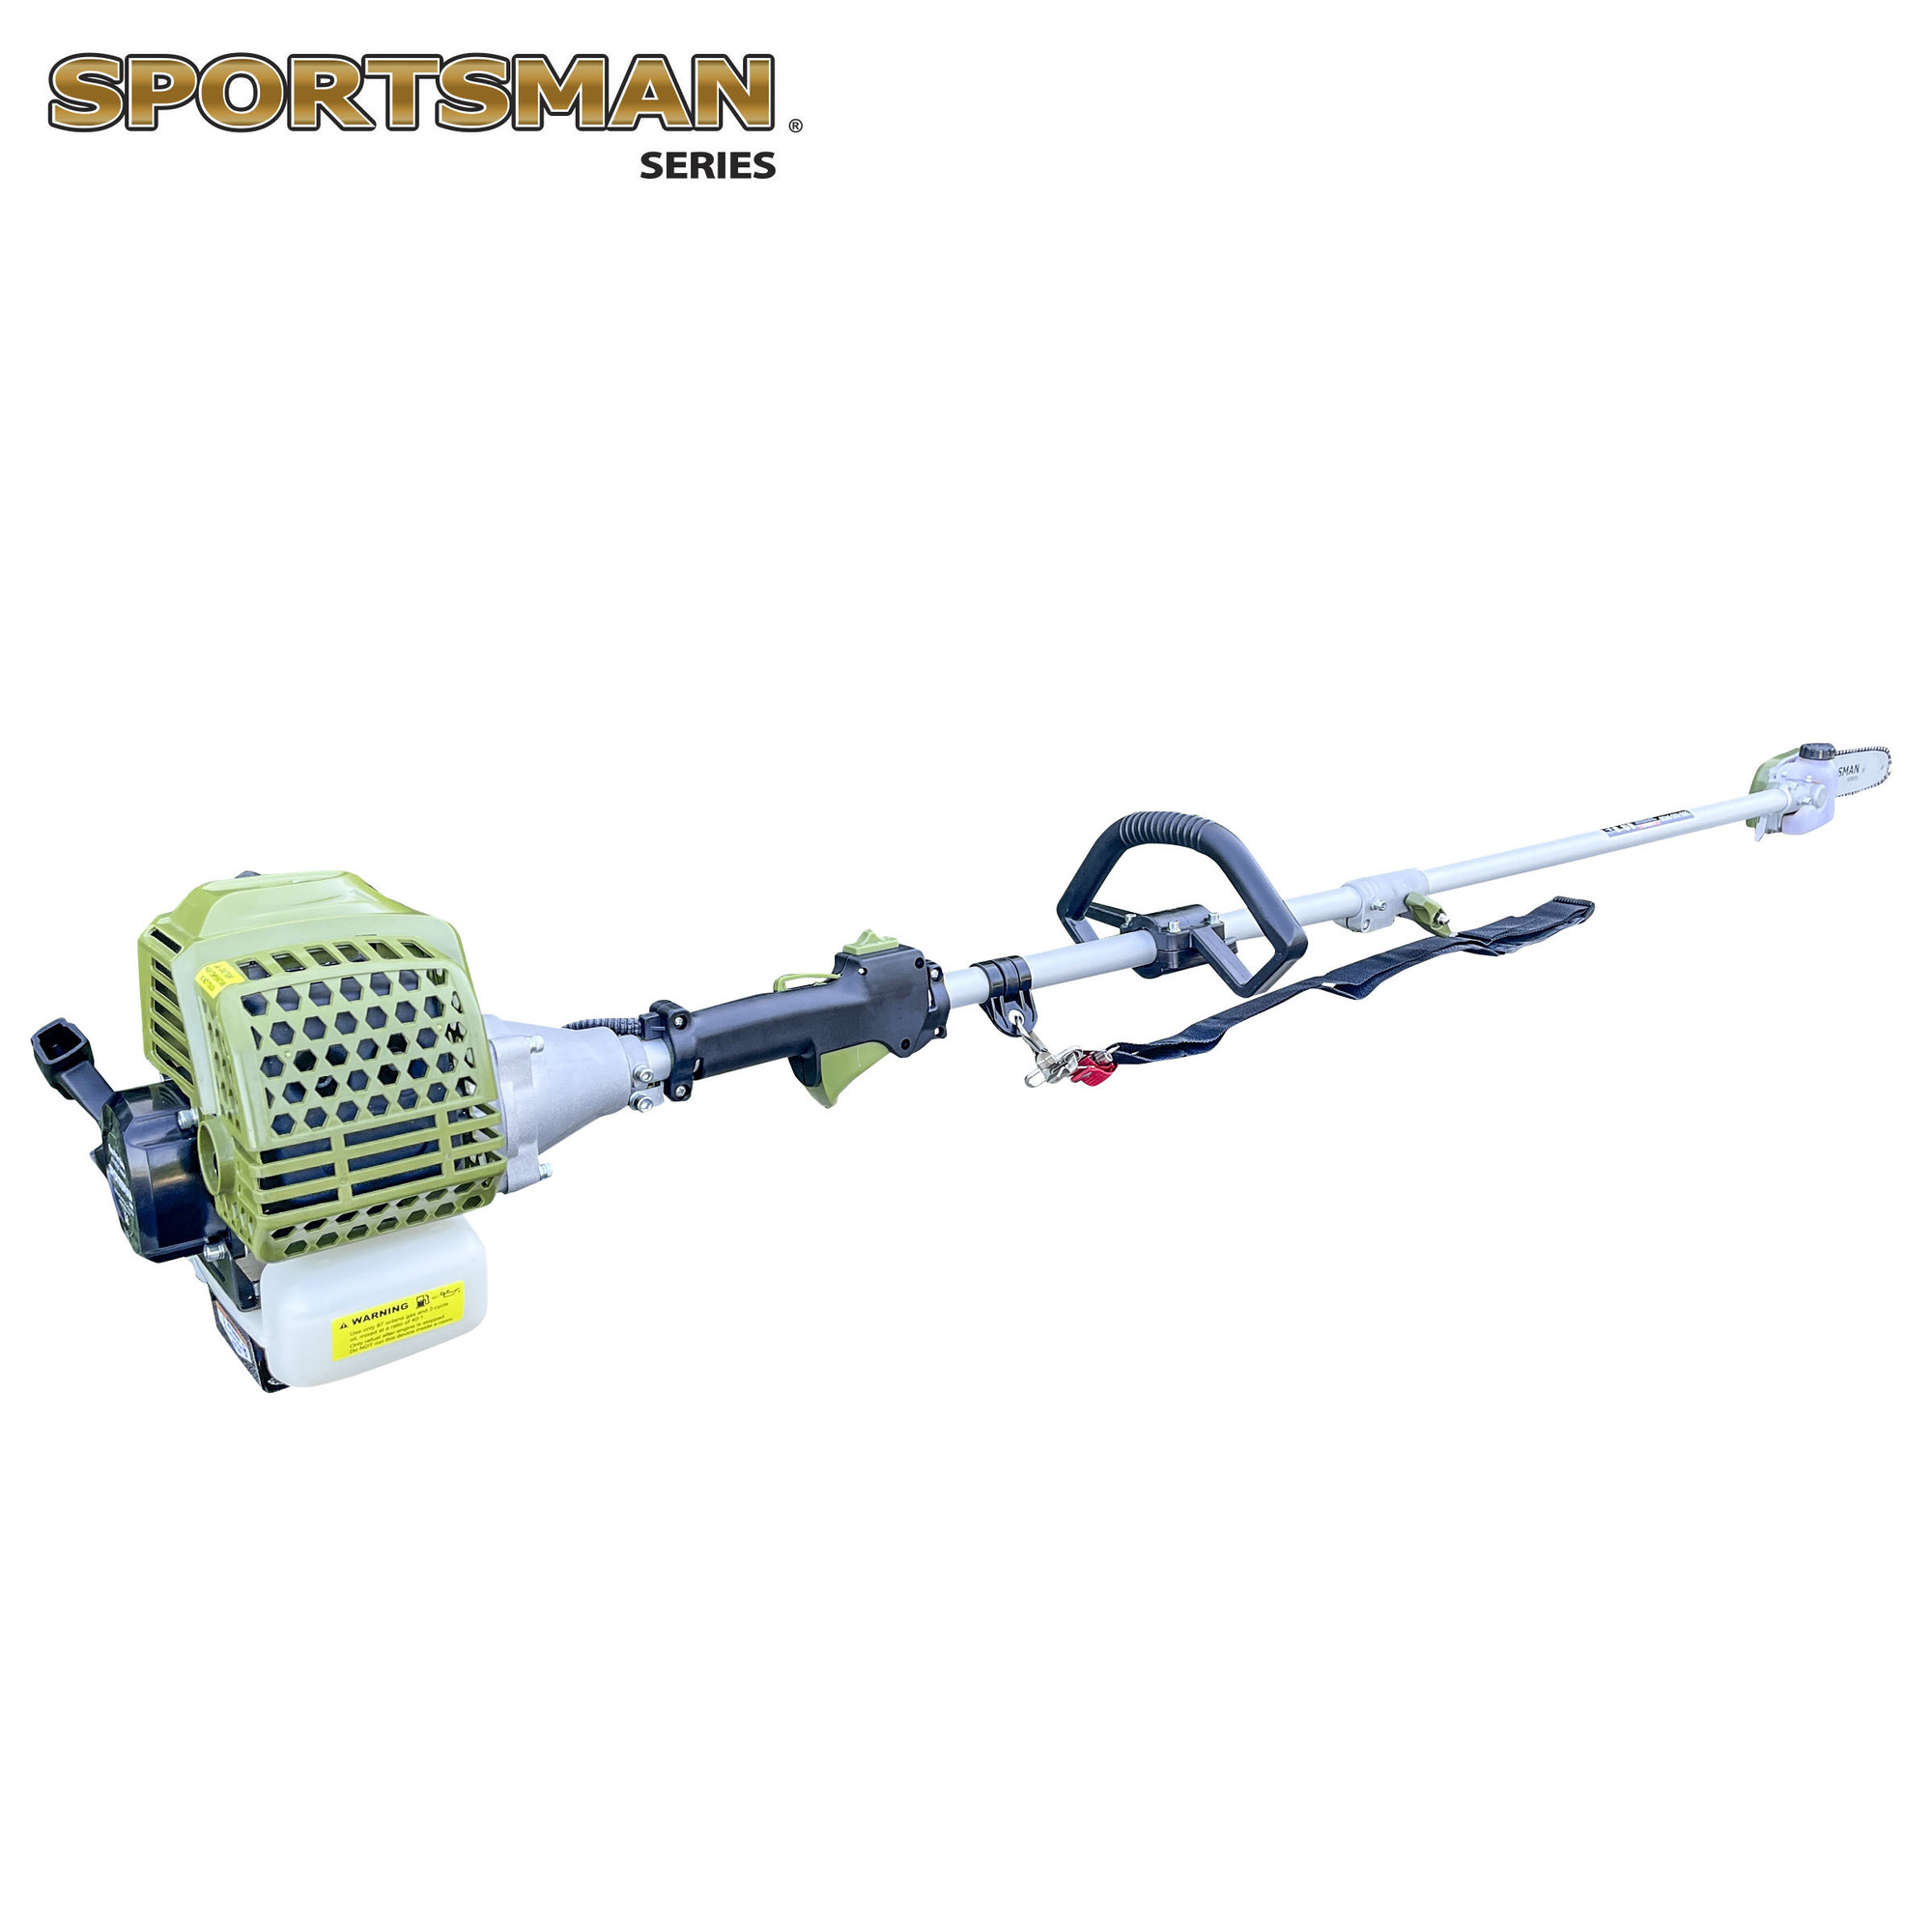 Sportsman Series, Gas Pole Saw With Hedge Trimmer, Bar Length 9.75 in, Operating Height 1 ft, Model GPSHT32